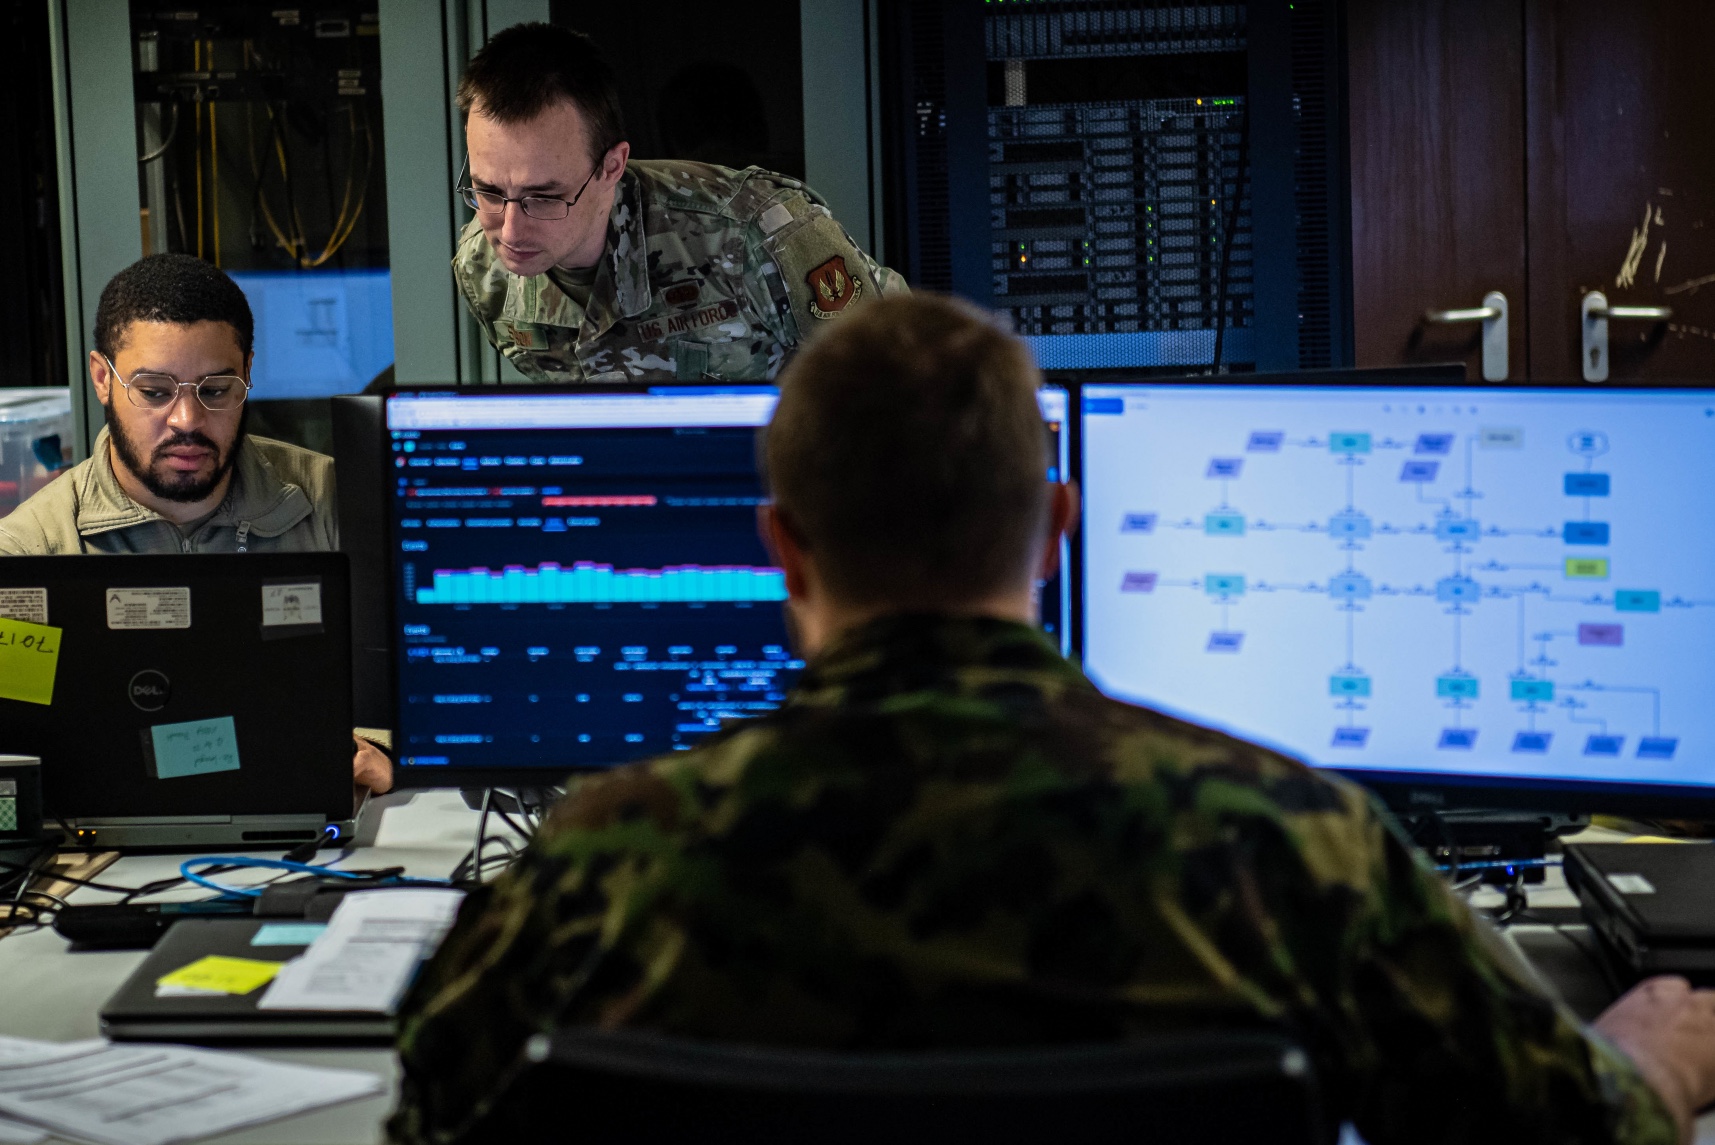 Tacet Venari participants analyze metadata to identify any suspicious activity on the network during exercise Tacet Venari at Ramstein Air Base